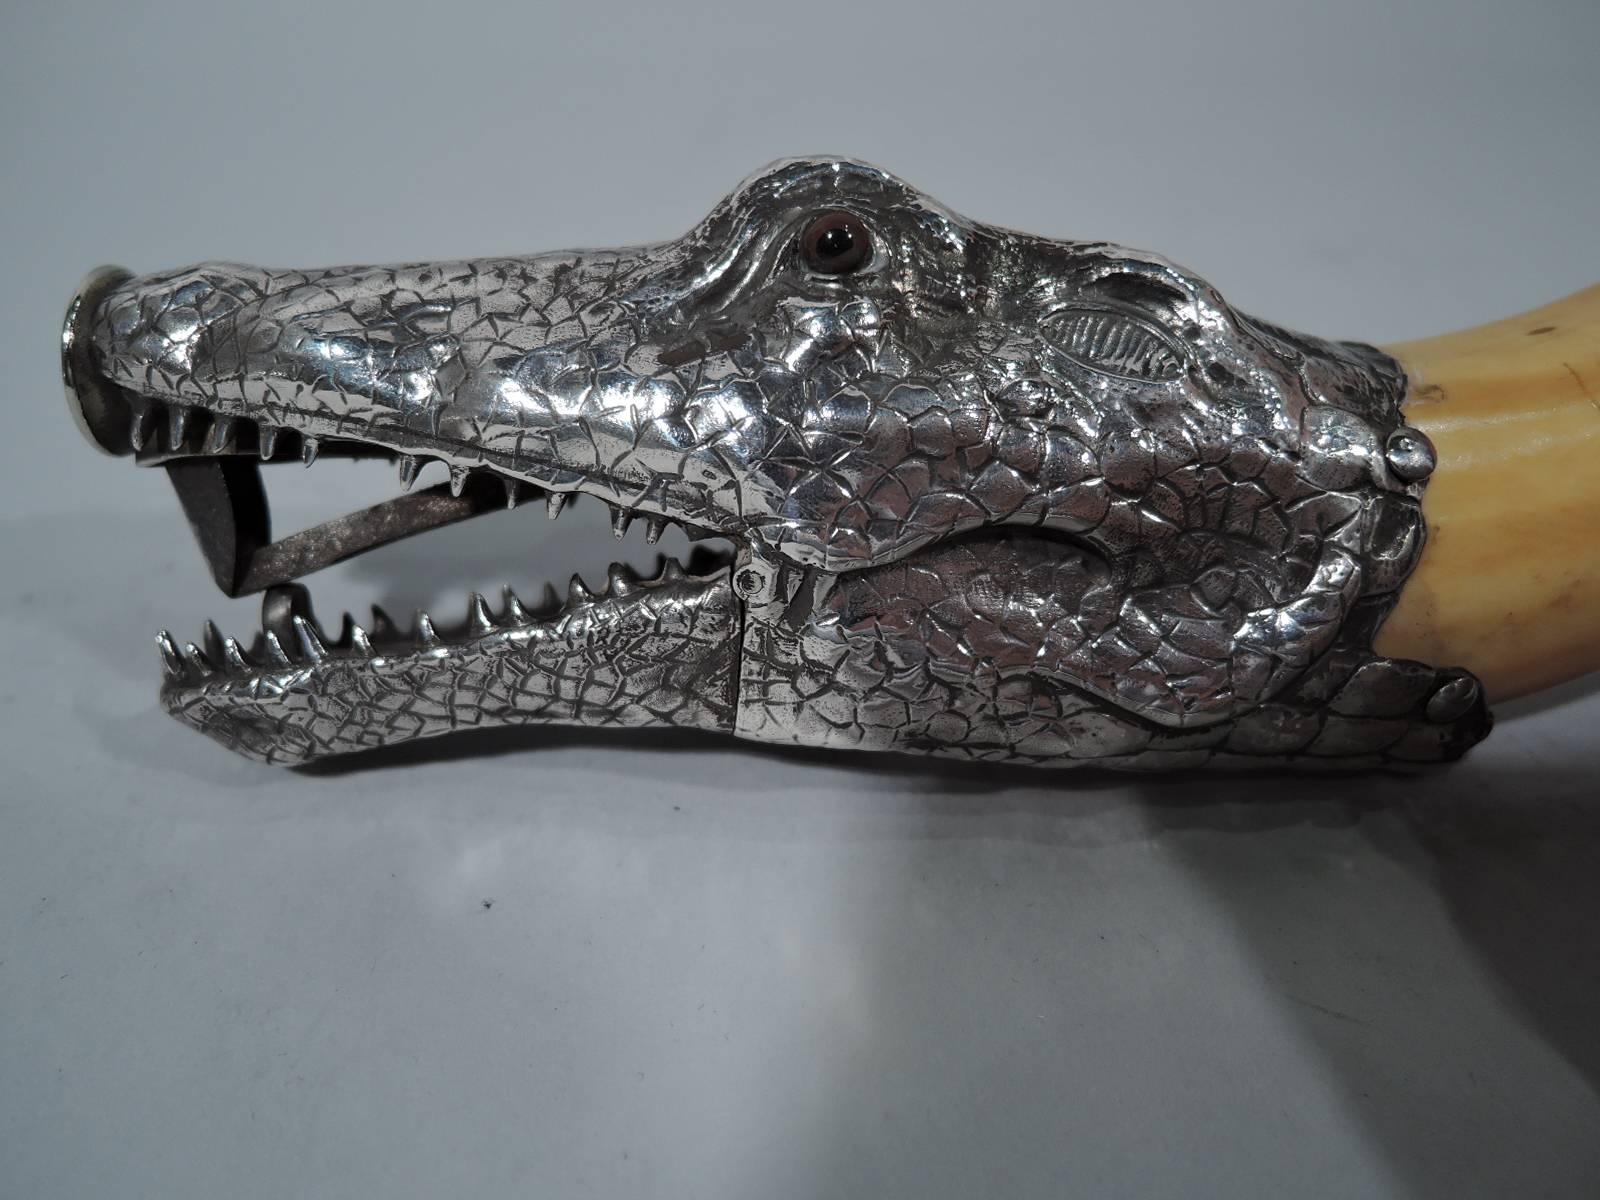 Boar’s tusk cigar cutter with silver reptile mount, circa 1910. Mount in form of crocodile head with weathered and scaly hide and brown glass eyes. Blade concealed in mouth, which also has some major dentition. Snap go the jaws! European hallmark –